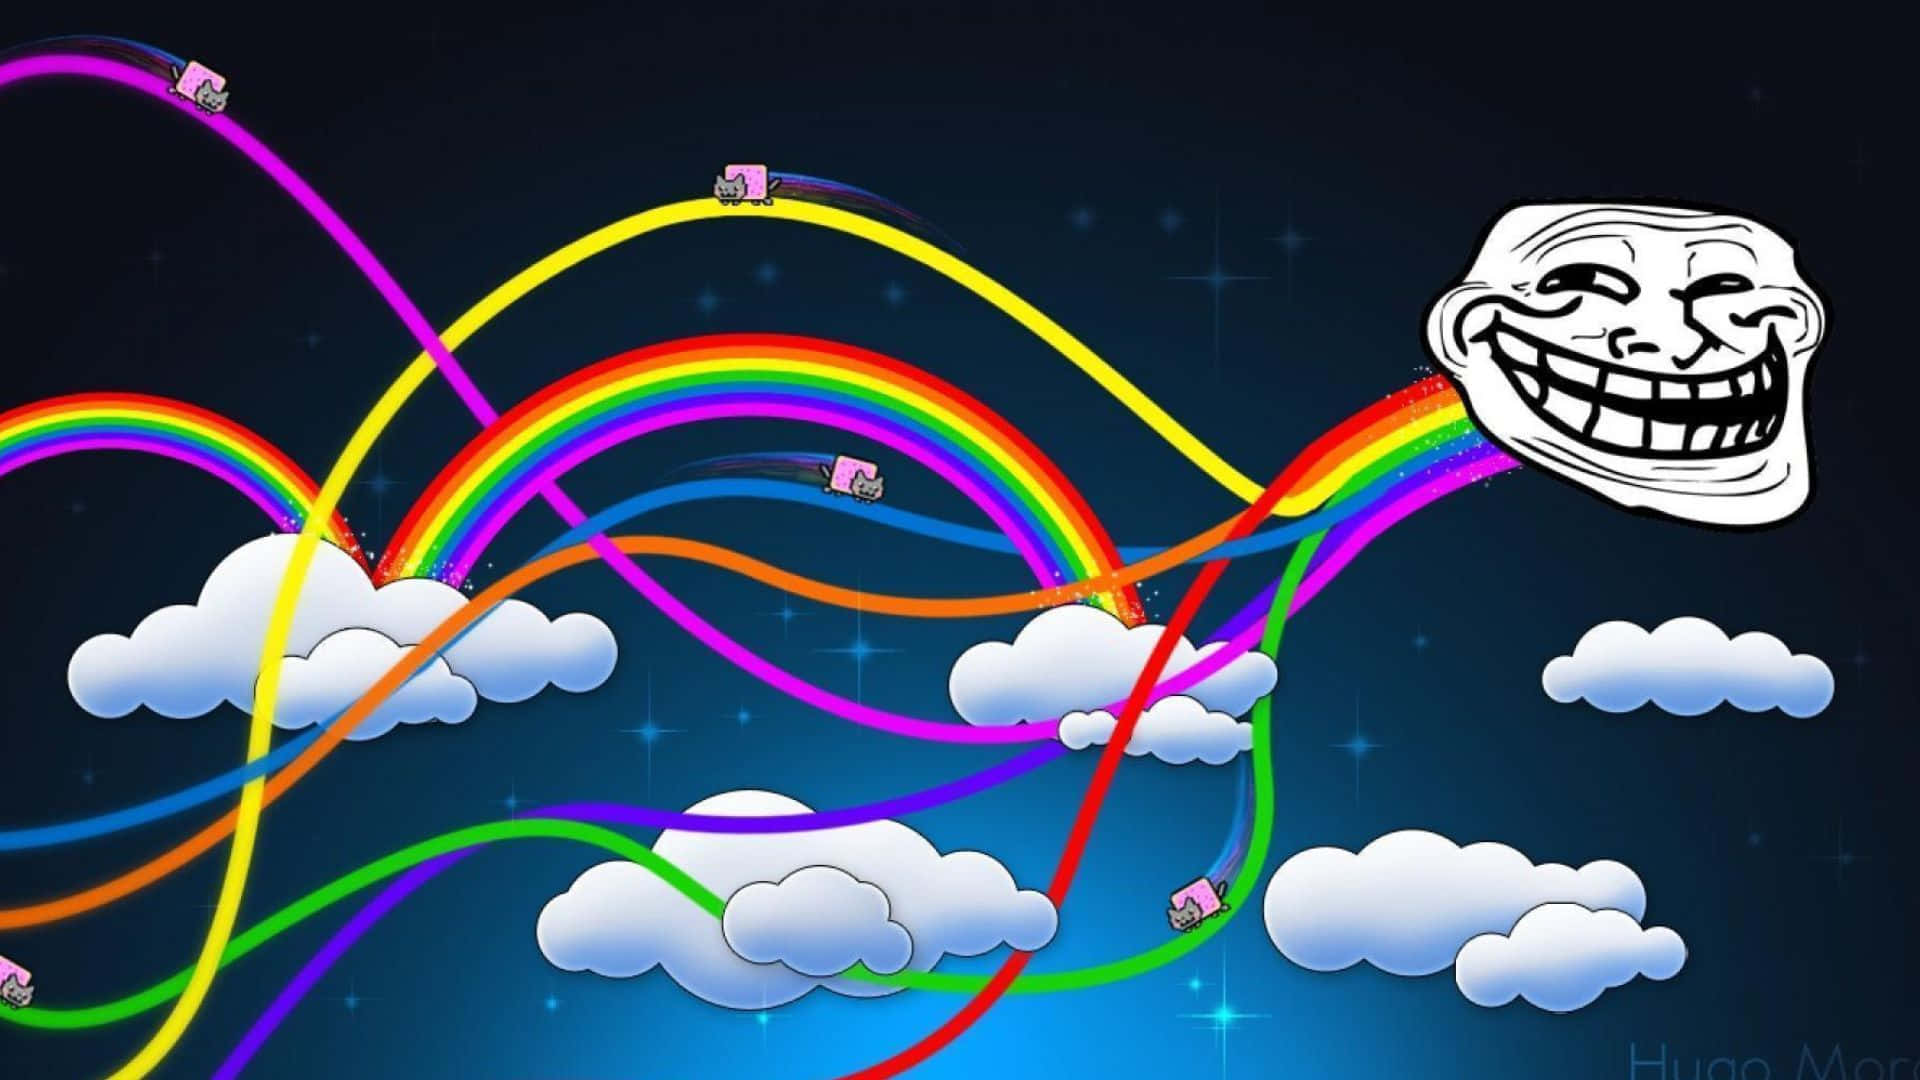 Nyan Cat flying across a colorful rainbow background